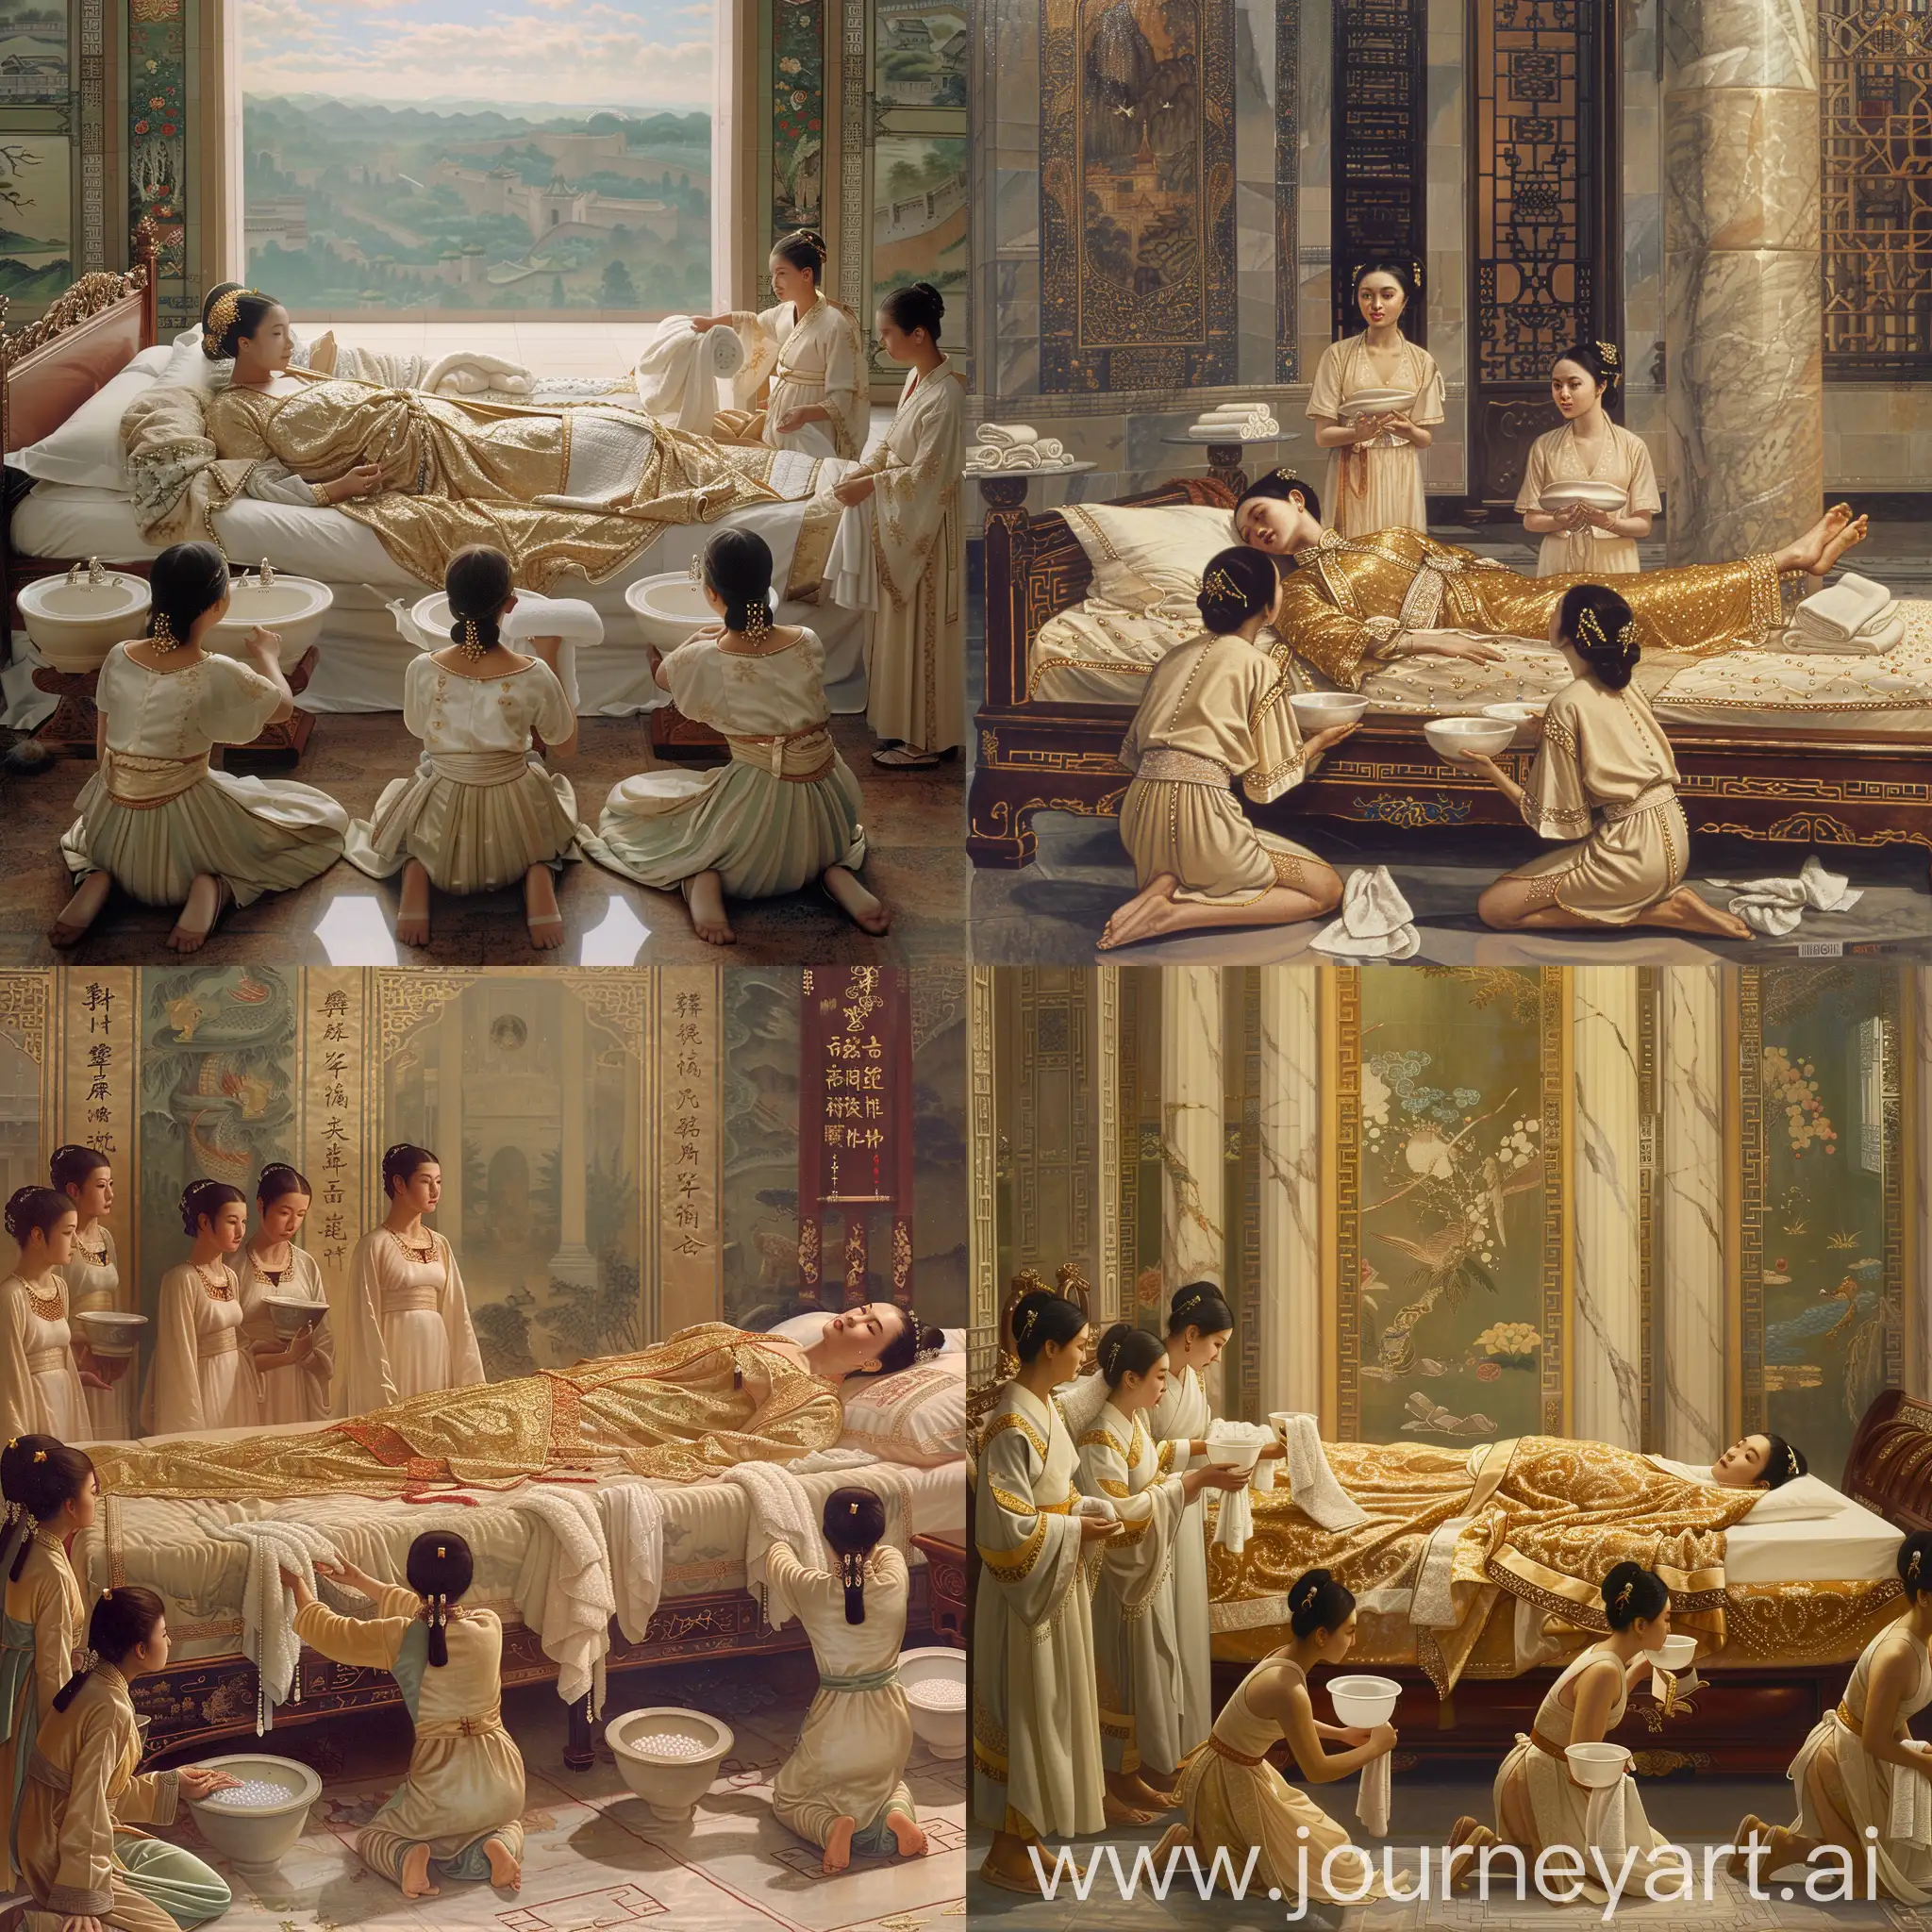 Wu-Zetian-Morning-Routine-Luxurious-Bed-Chamber-with-Maids-and-Hanfu-Attire